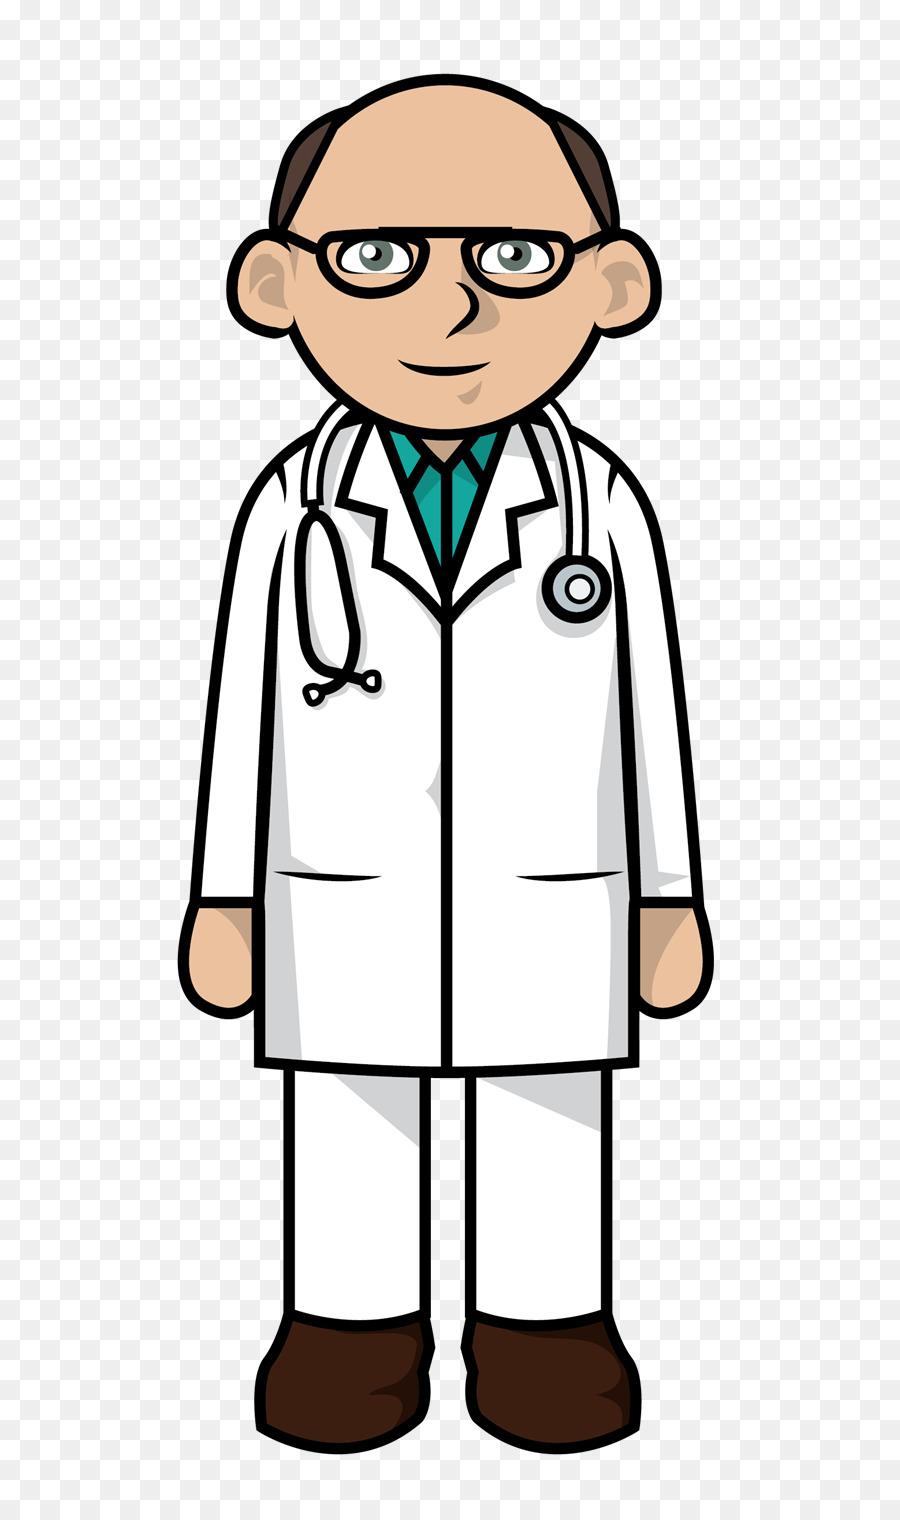 Physician Clip art - Doctor Cliparts png download - 800*1514 - Free Transparent Physician png Download.